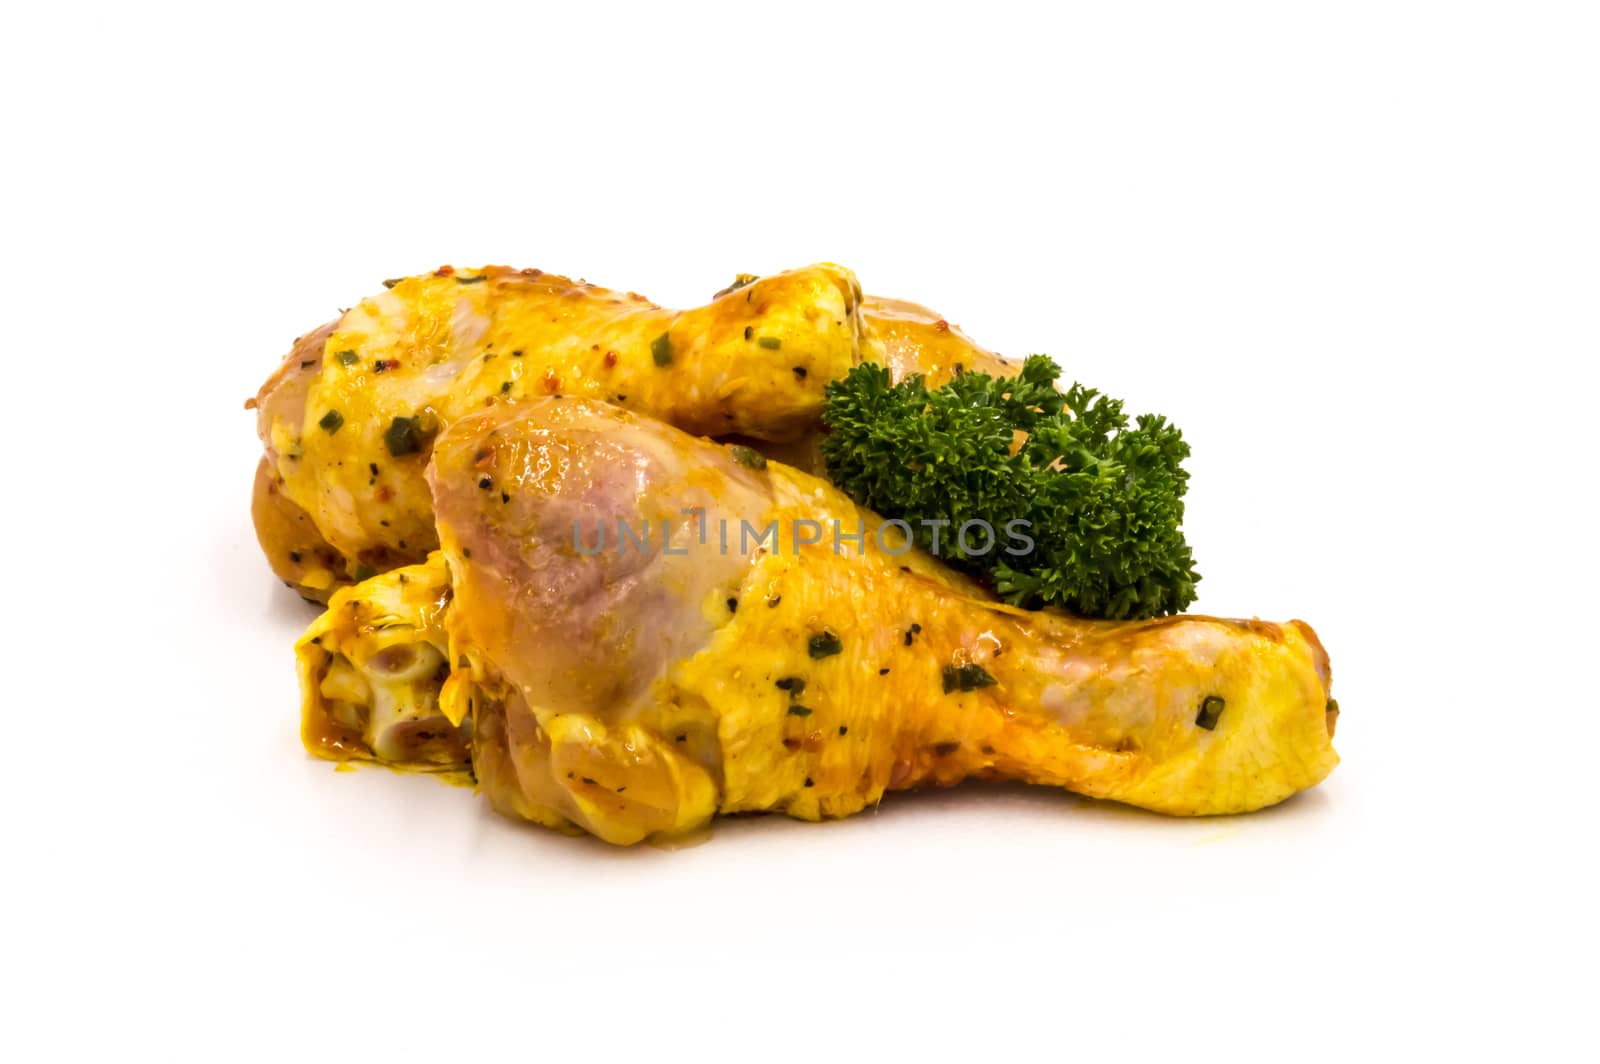 Chicken drumsticks marinate with parsley  by Philou1000